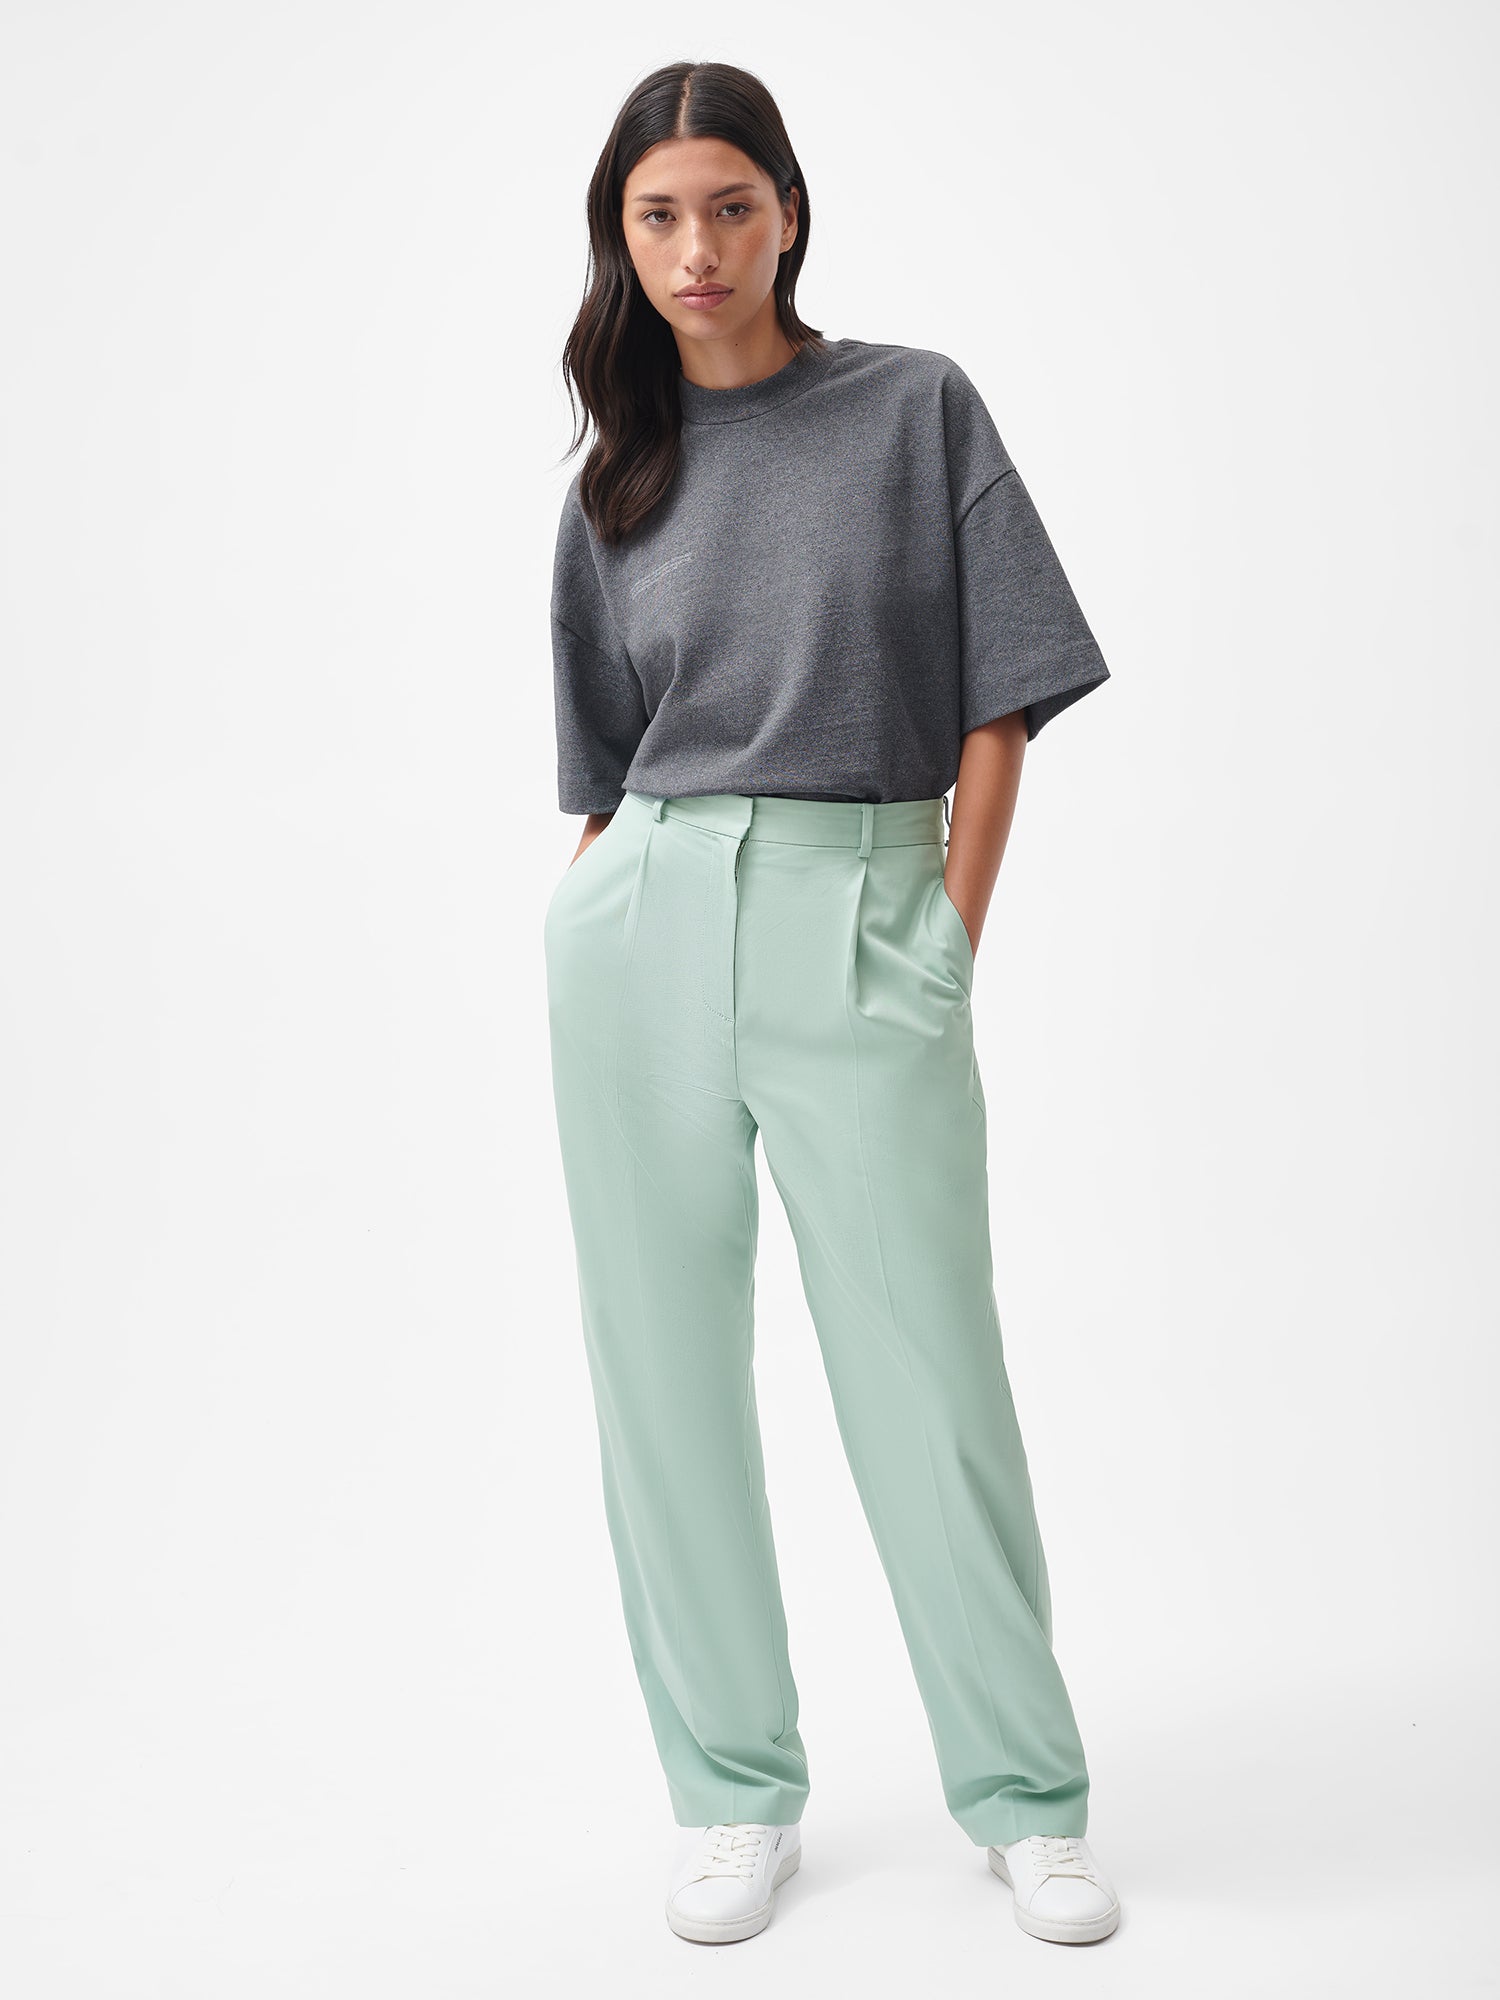 ASOS DESIGN smart tapered trousers in stone | ASOS